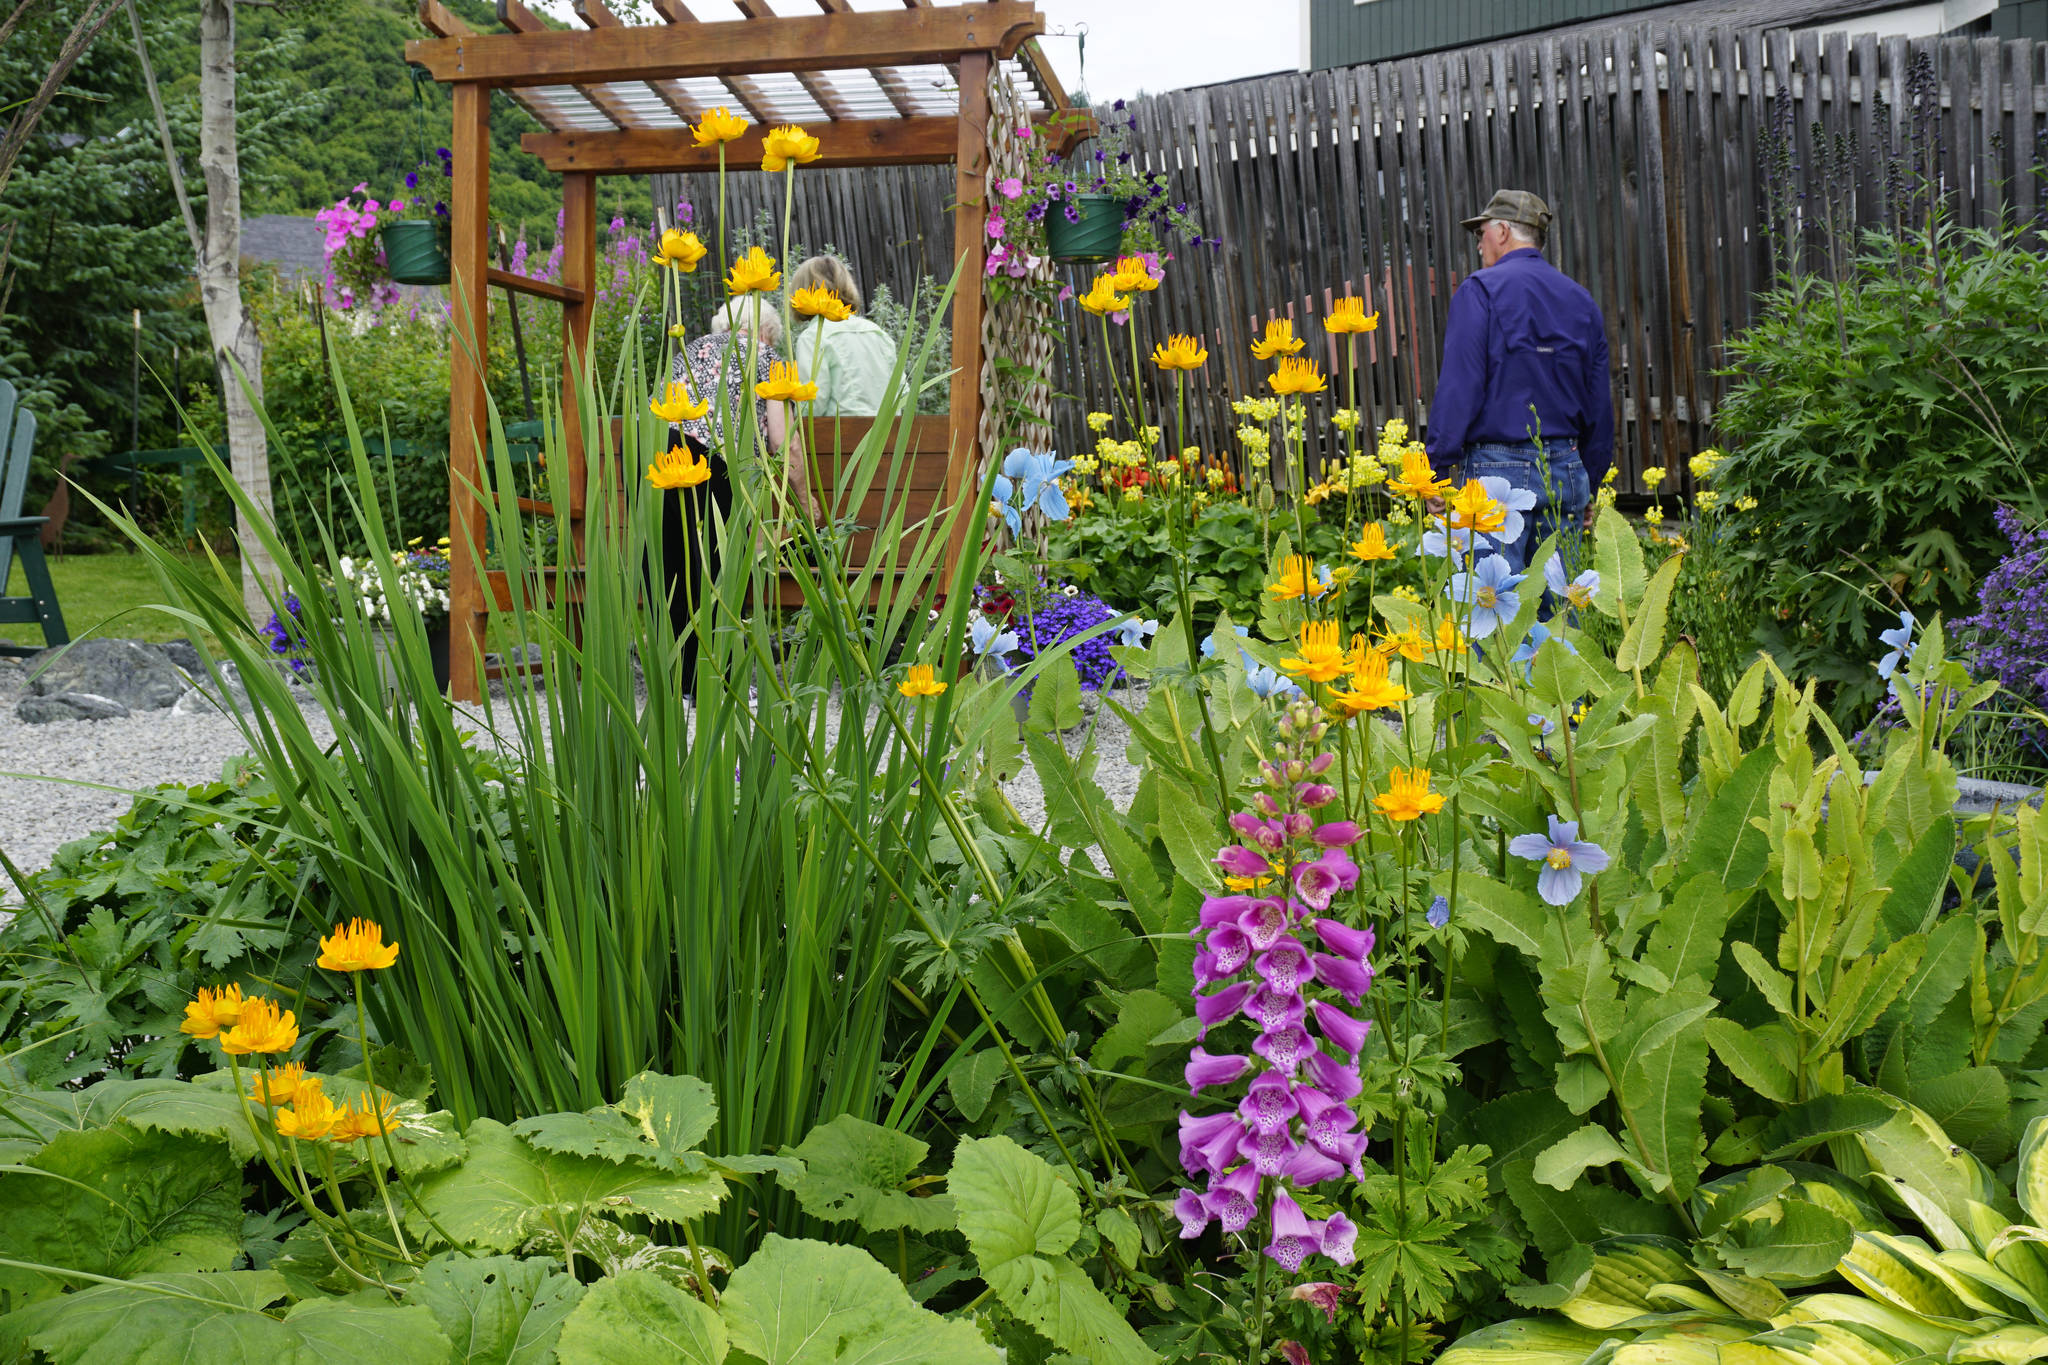 Francie Roberts’ “Everything Garden” on Mountainview Drive in Homer, Alaska includes flower beds, fountains, a vegetable garden and a greenhouse. It was one of five gardens featured in the July 29, 2018 Homer Garden Tour. (Photo by Michael Armstrong/Homer News)